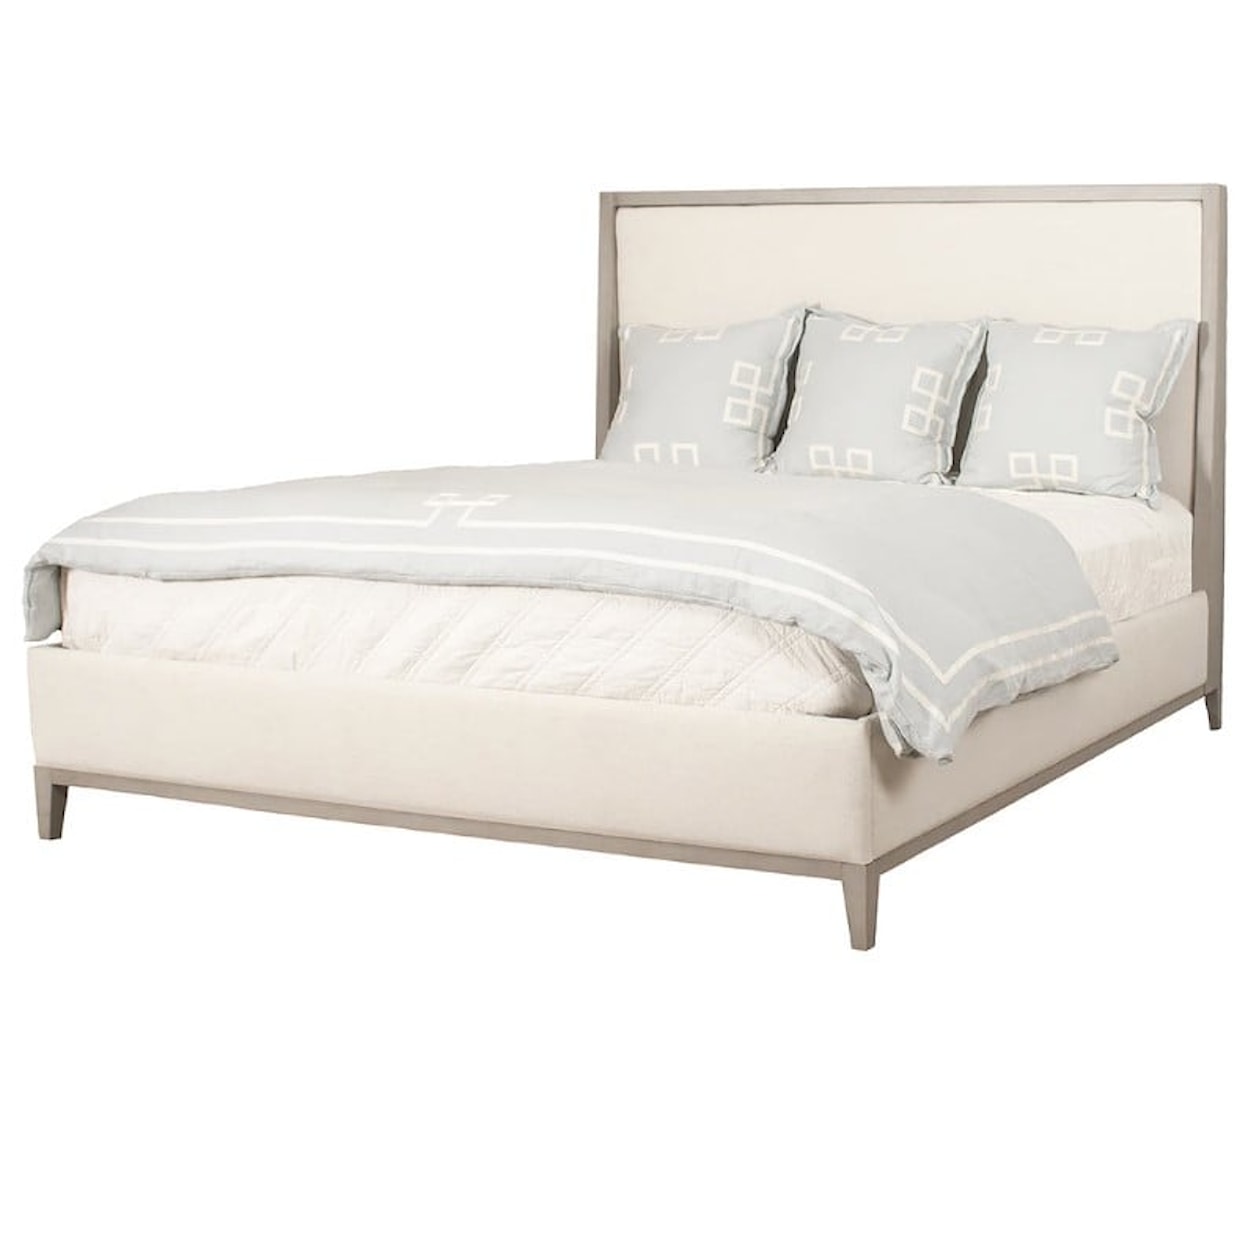 Fairfield Libby Langdon ACKERLY QUEEN BED